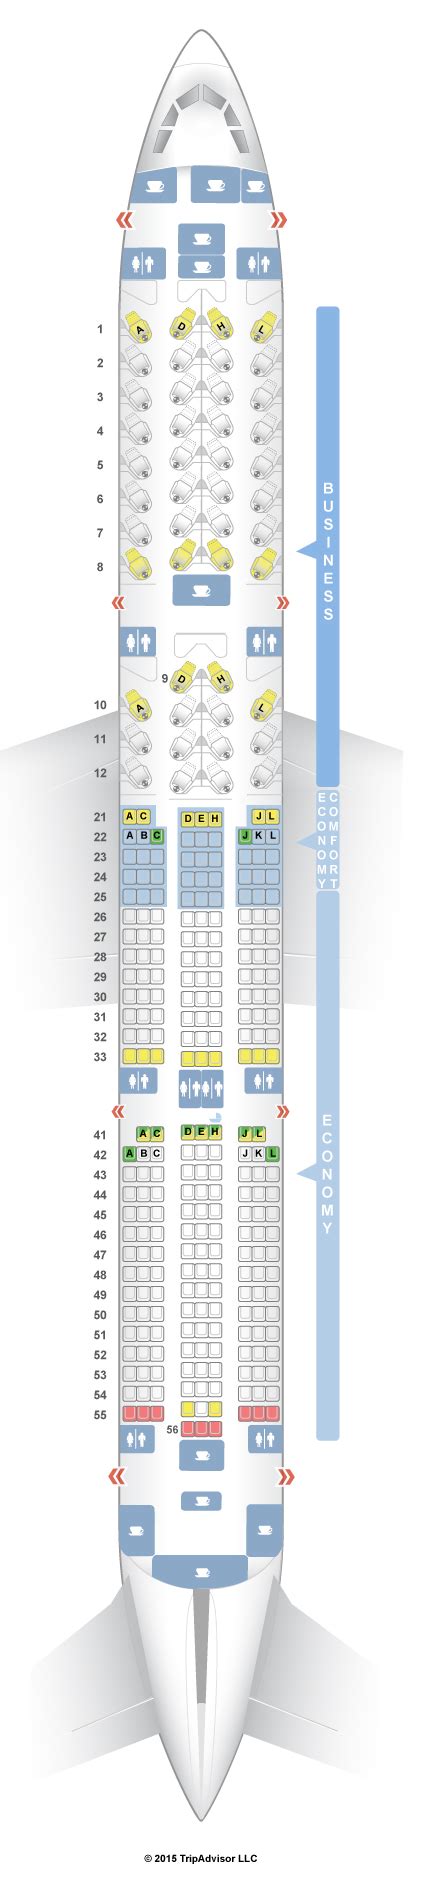 Seatguru airbus a350 900. Discover the seatmap and cabins of Air France's Airbus A350. A350-900 - 324 seats. Features Length in meters: 66.80 Wingspan in meters: 64.75 Cruising speed: Mach .85 Cruising altitude: 10,700 m / 35,000 ft. VIEW SEATMAP* A350-900 - 292 seats. Features Length in meters: 66.80 Wingspan in ... Discover the new A350 cabins. Cabin layout. Cabins ... 